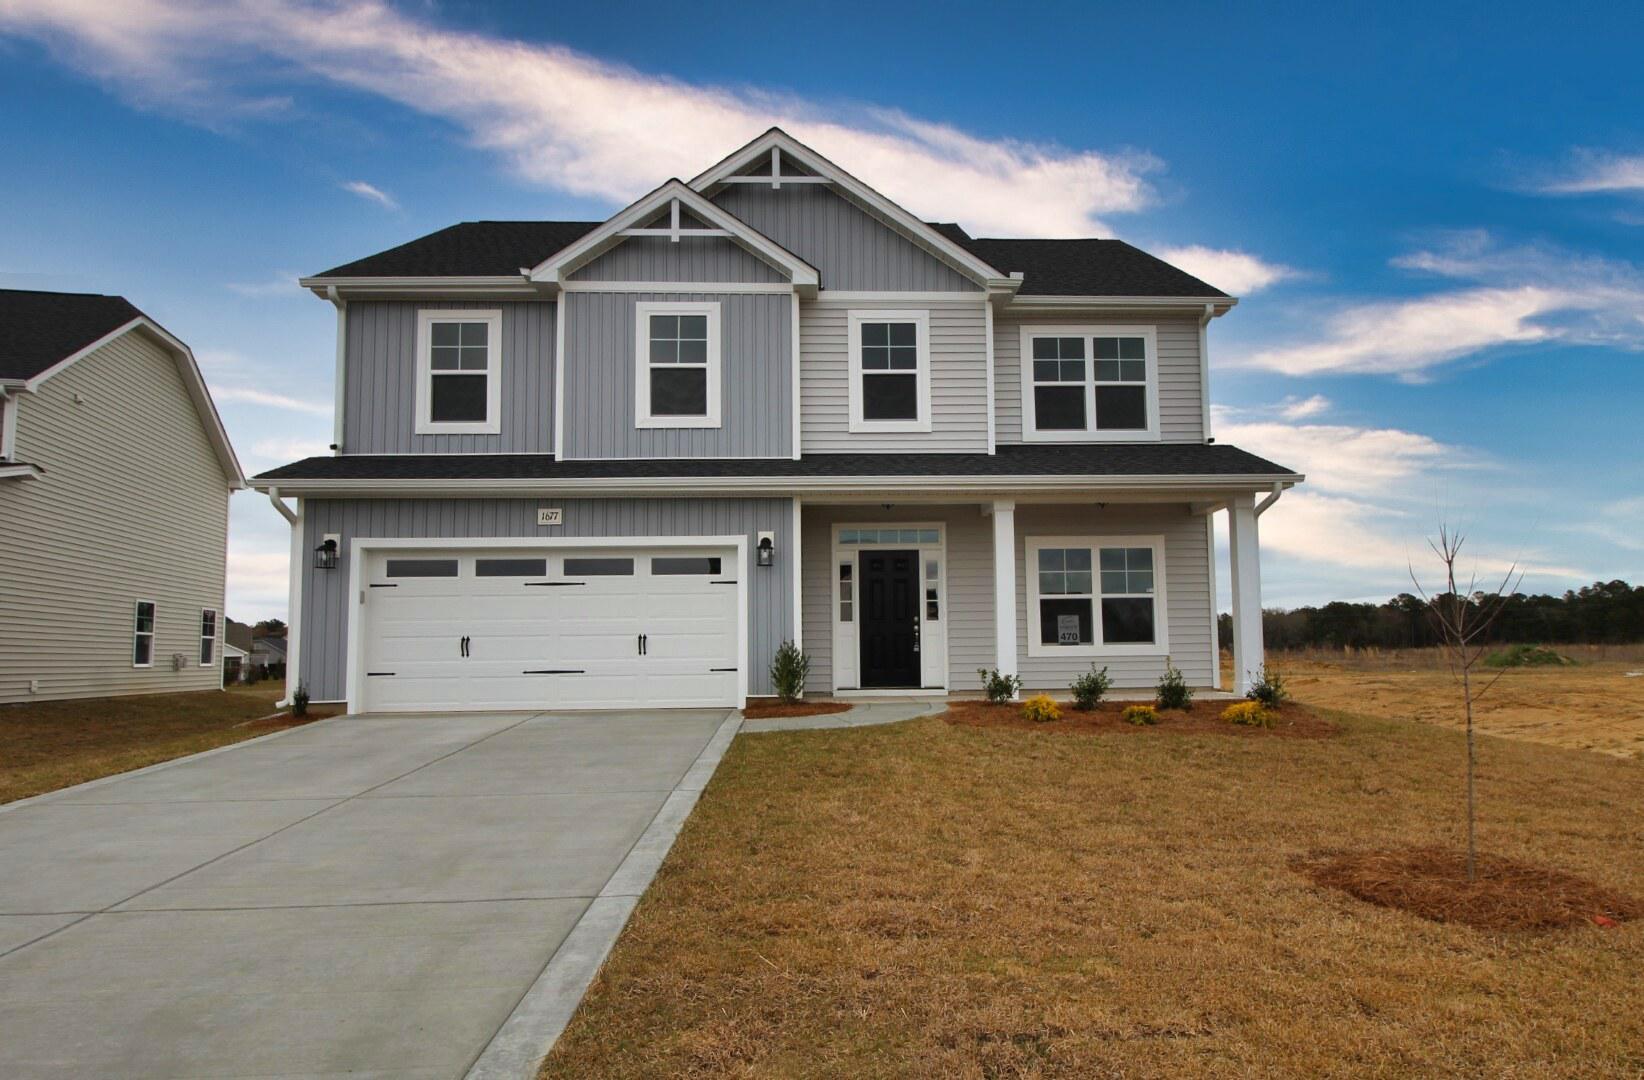 4br New Home in Hope Mills, NC